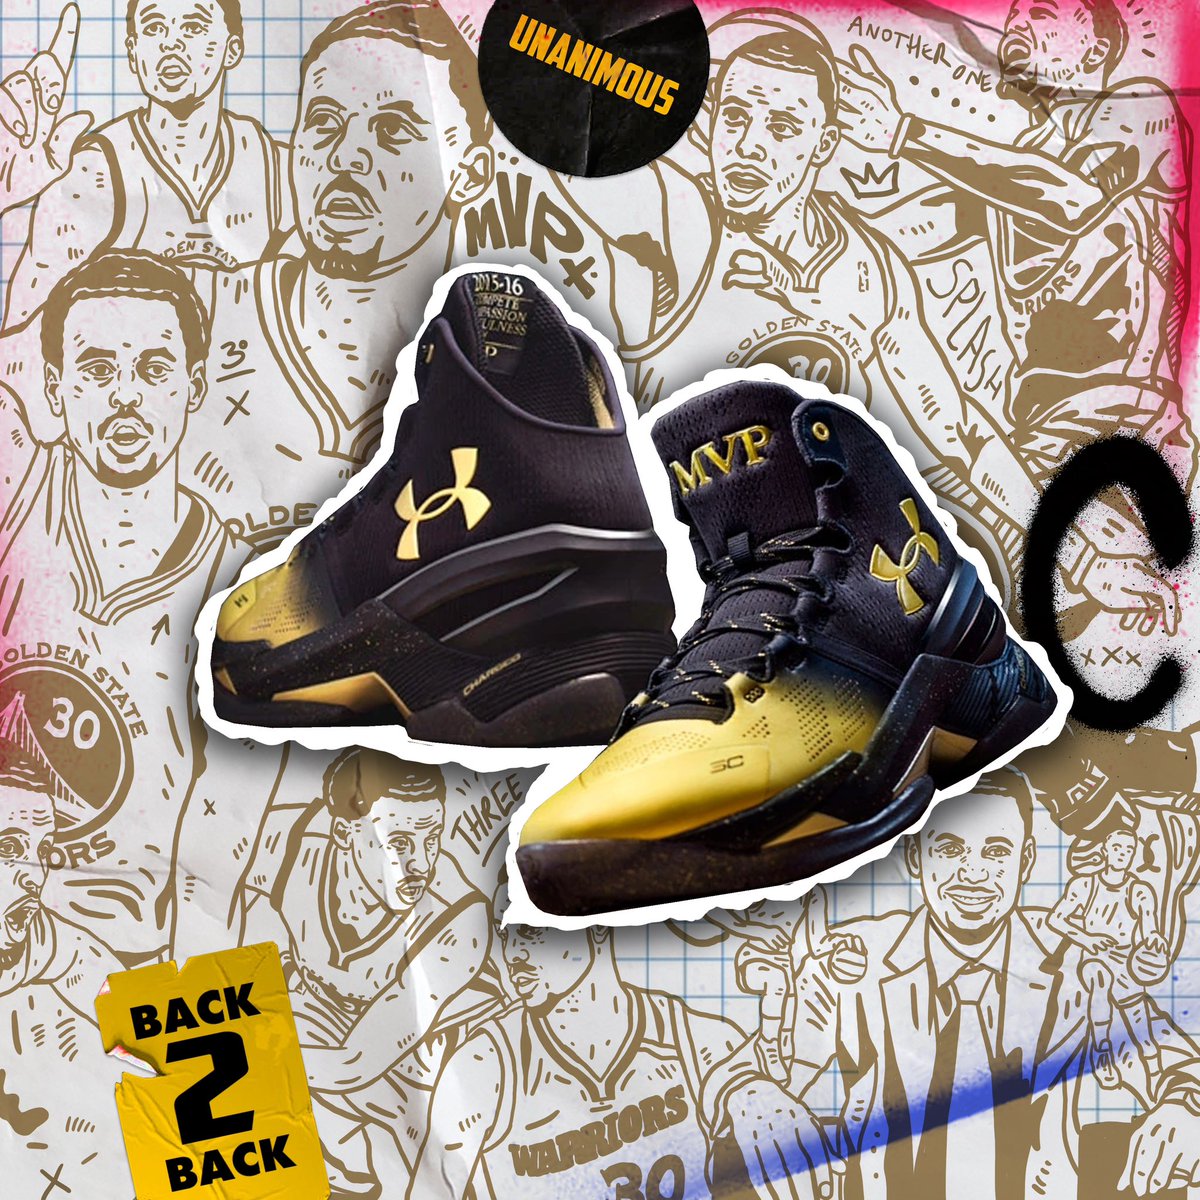 Huge thanks to @footlocker_au and @underarmourau for these special edition @currybrand pack.. #footlocker #underarmour #currybrand #stephcurry #flexclusive #goldenstatewarriors #curry #illustration #kicks #hoops #basketball #nba #chefcurry #back2back #unanimous #mvp